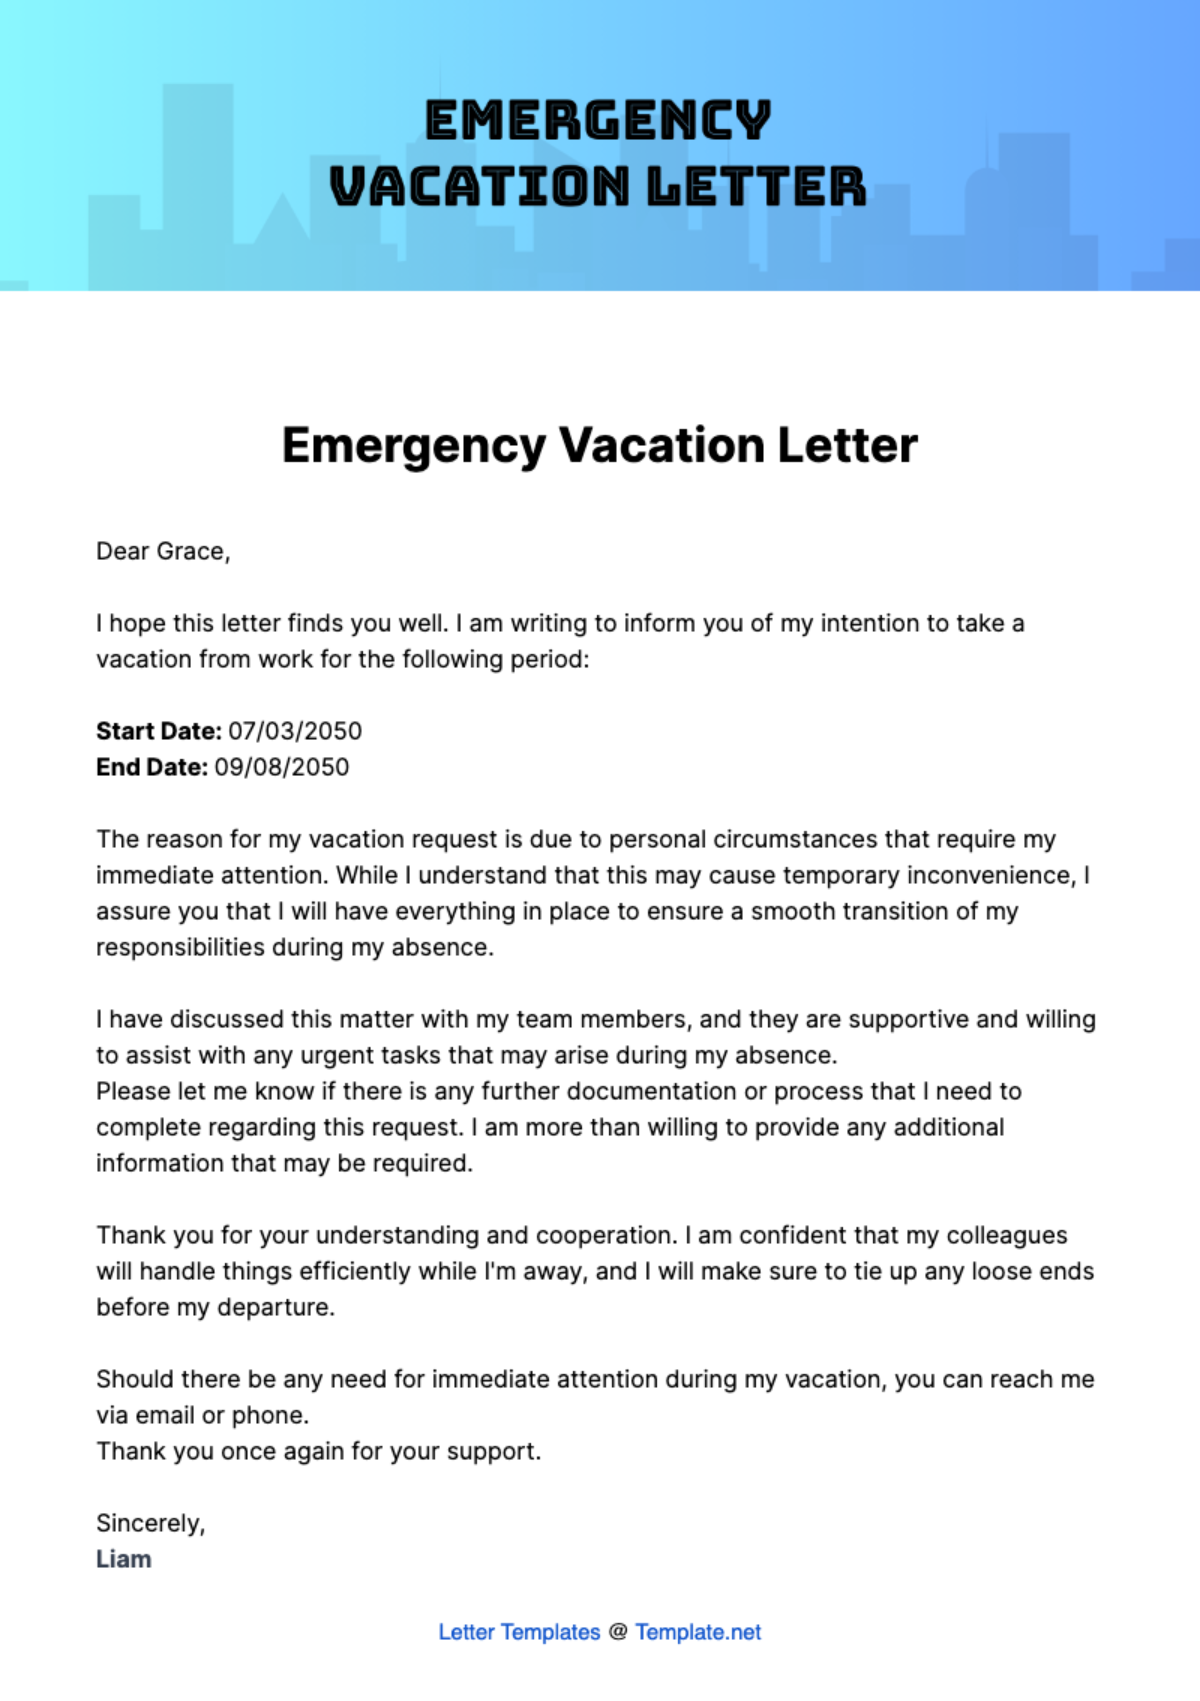 Emergency Vacation Letter Template